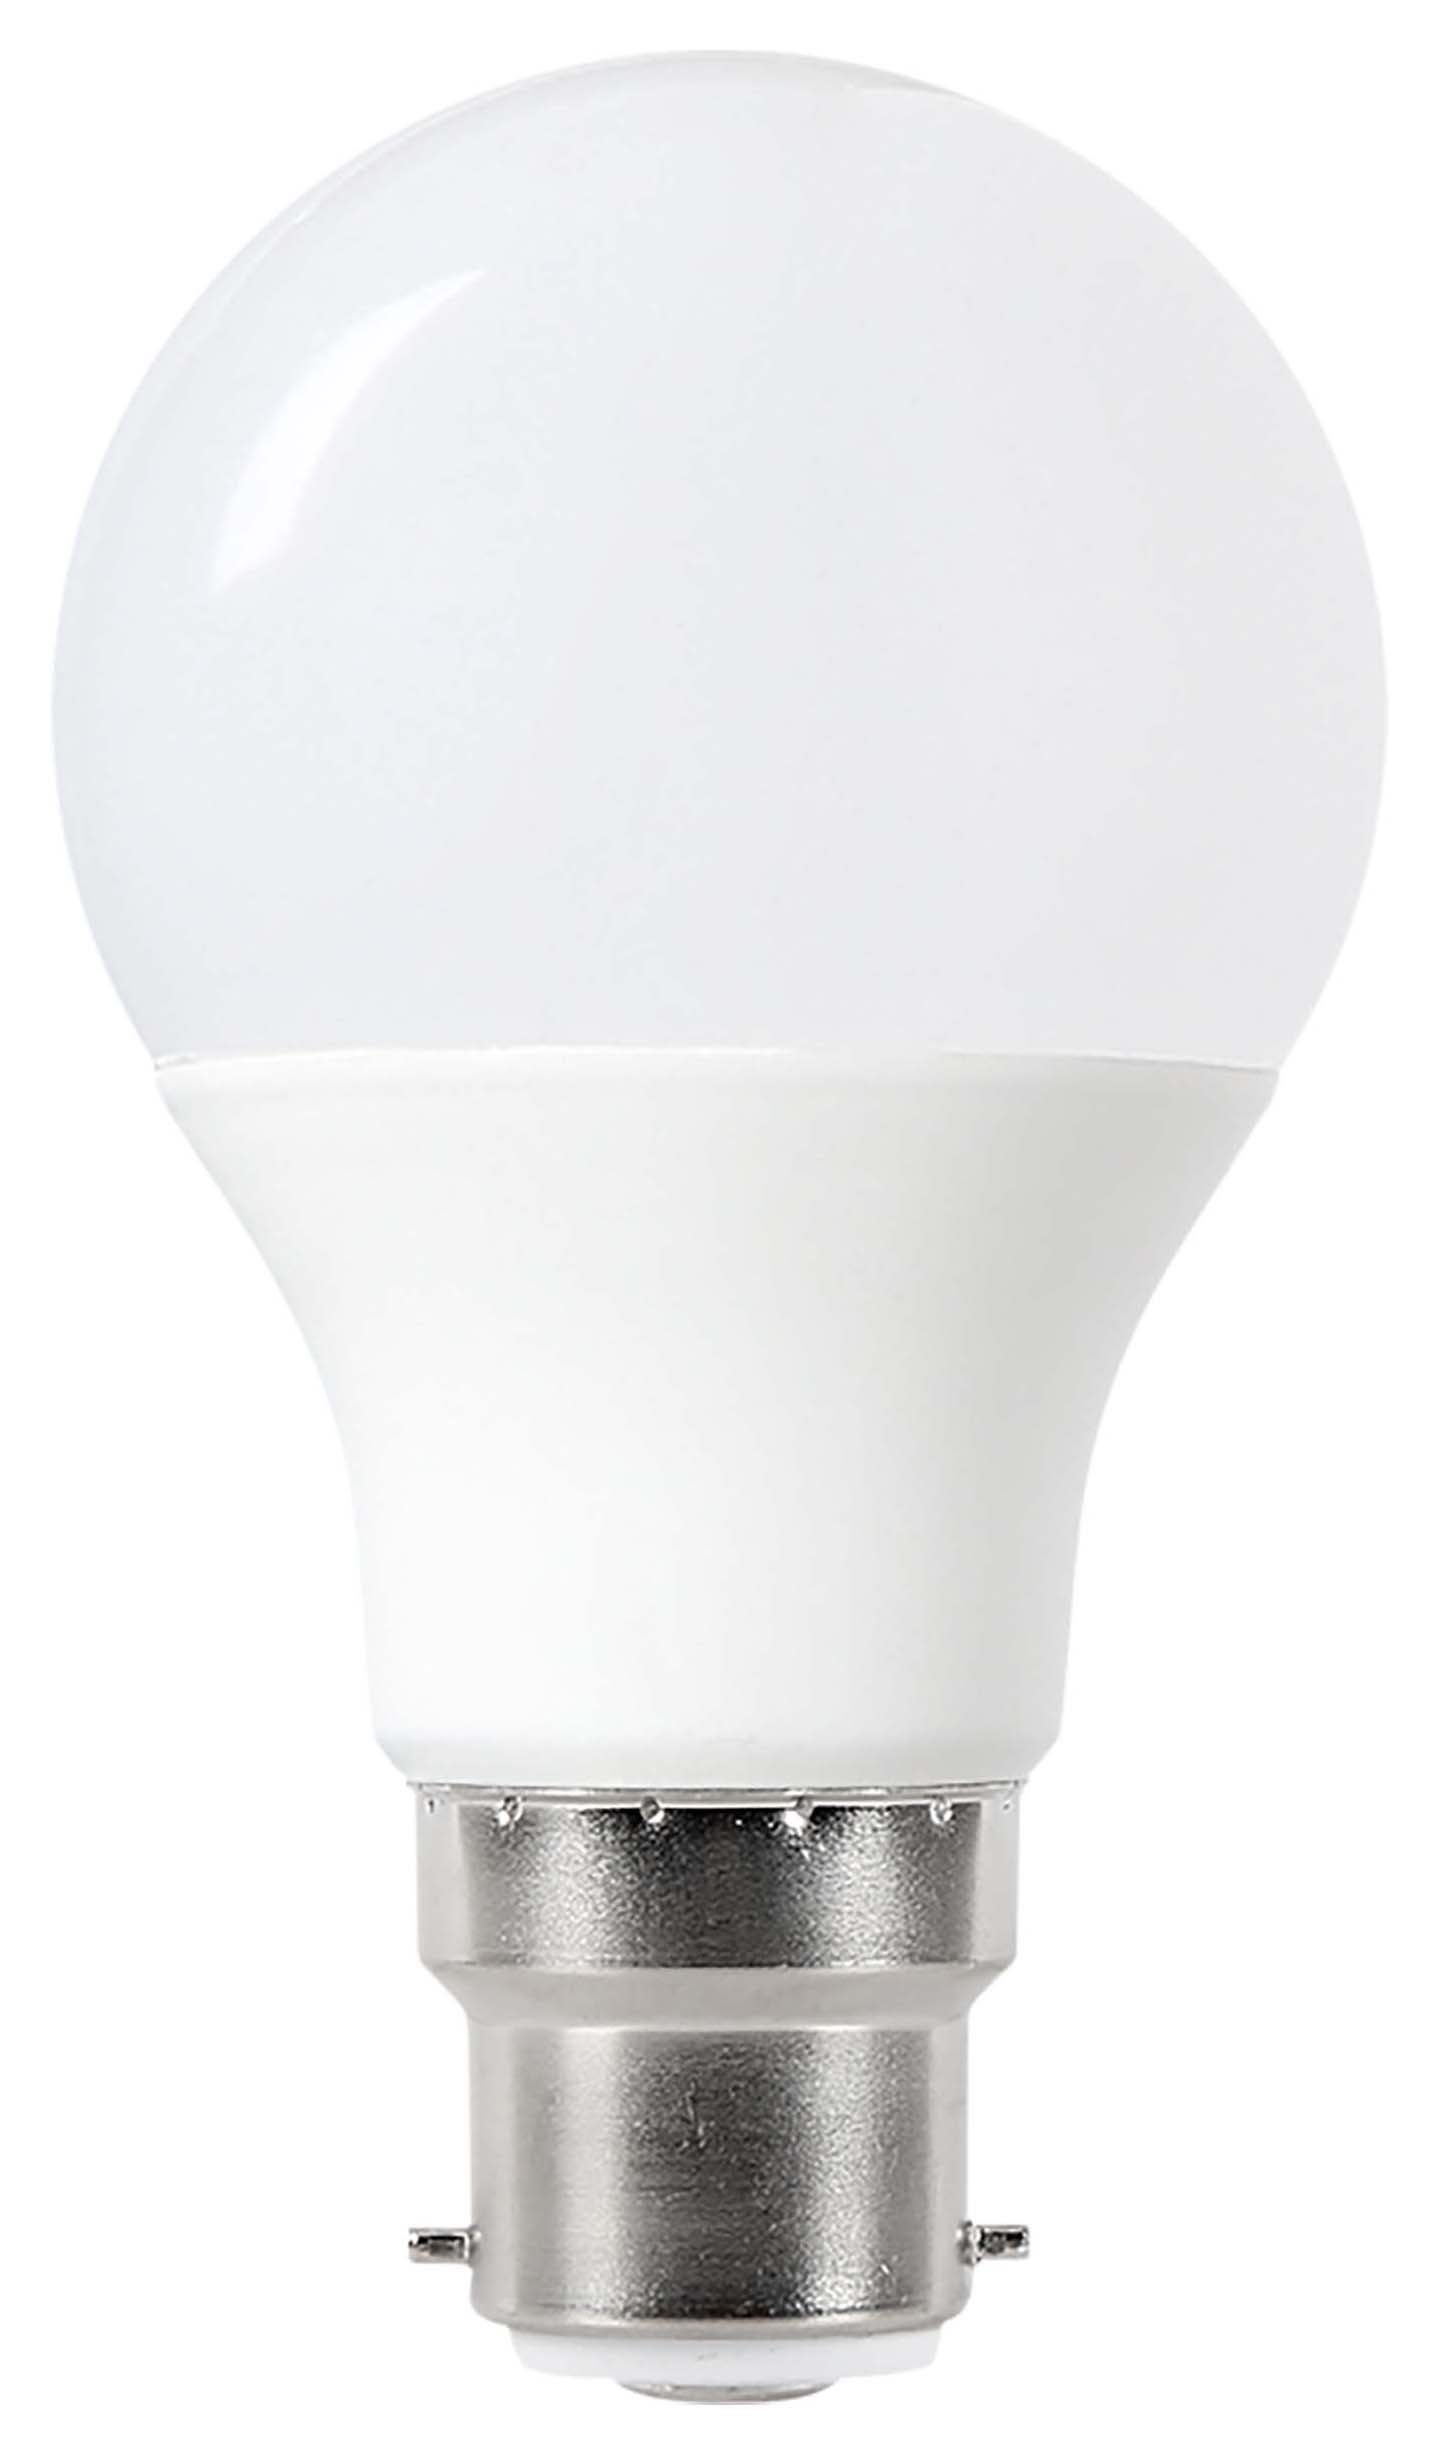 Wickes Non-Dimmable GLS Opal LED B22 4.8W Warm White Light Bulb